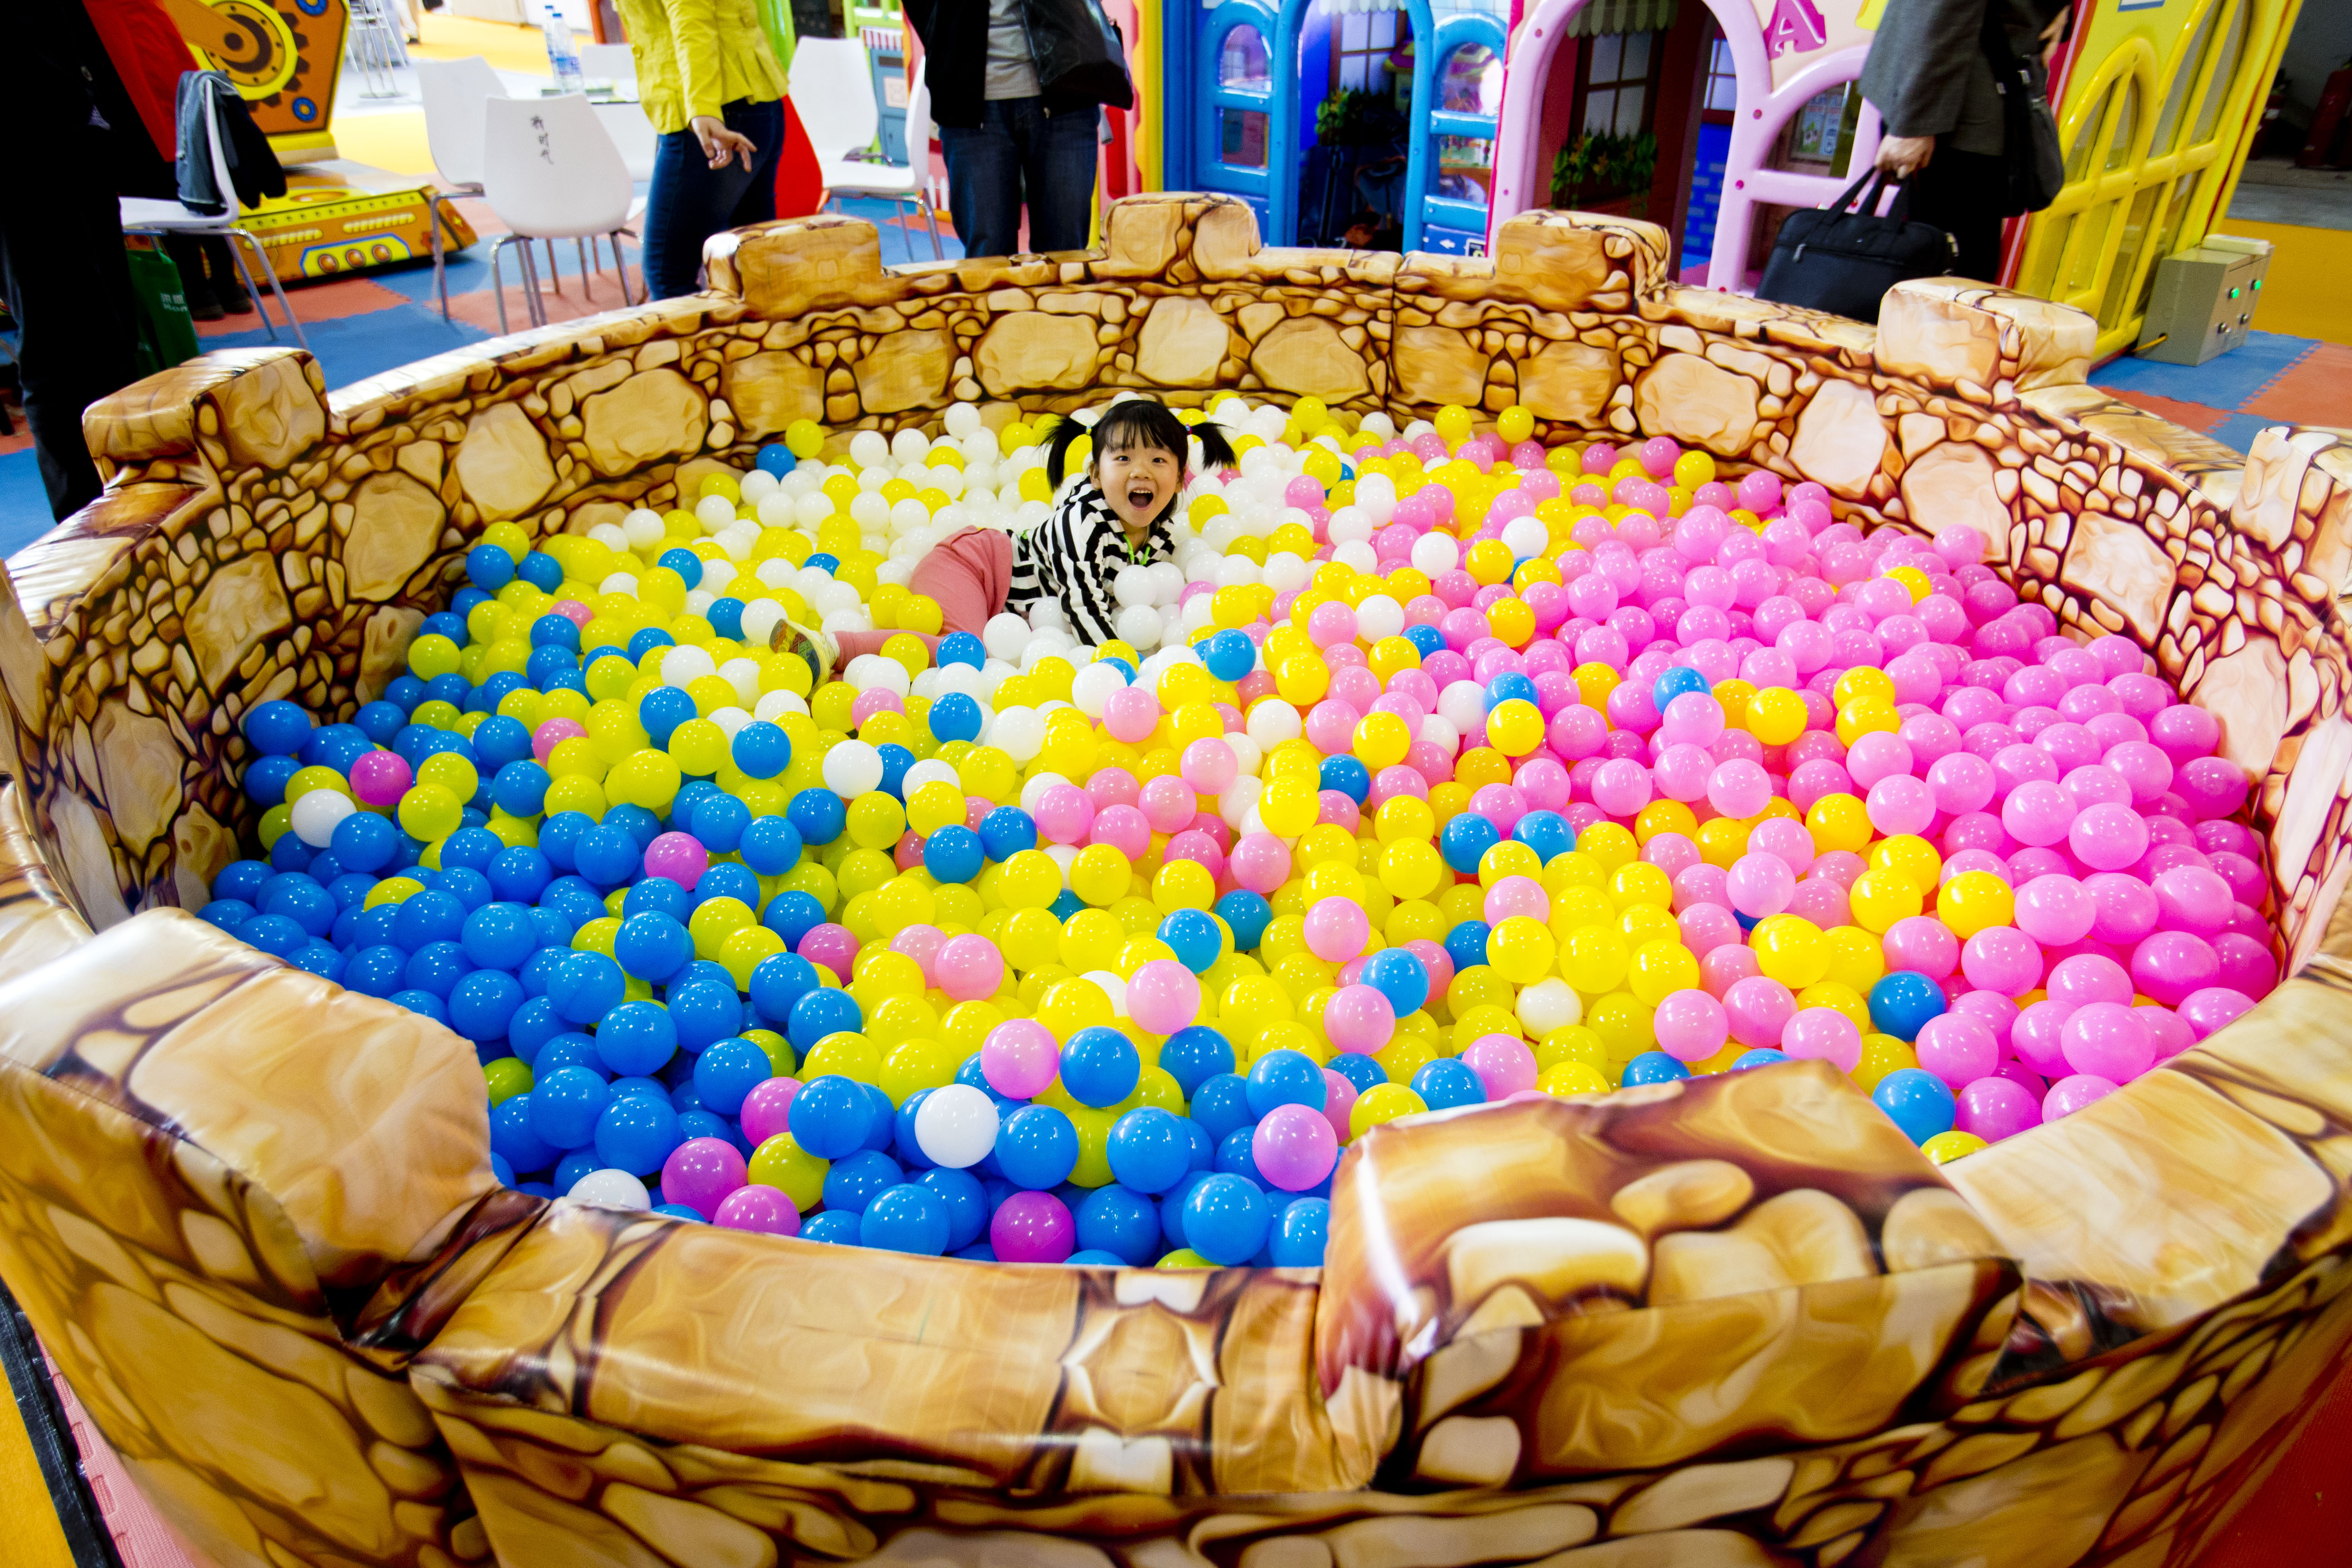 (140425) -- BEIJING, April 25, 2014 (Xinhua) -- A girl plays in colorful plastic pit balls during the 16th Beijing International Kindergarten Supplies & Auxiliary Equipment Exhibition, in Beijing, capital of China, April 24, 2014. Some 200 enterprises from more than 20 countries and regions took part in the exhibition, which kicked off here Thursday. (Xinhua/Zhao Bing) (wyo)